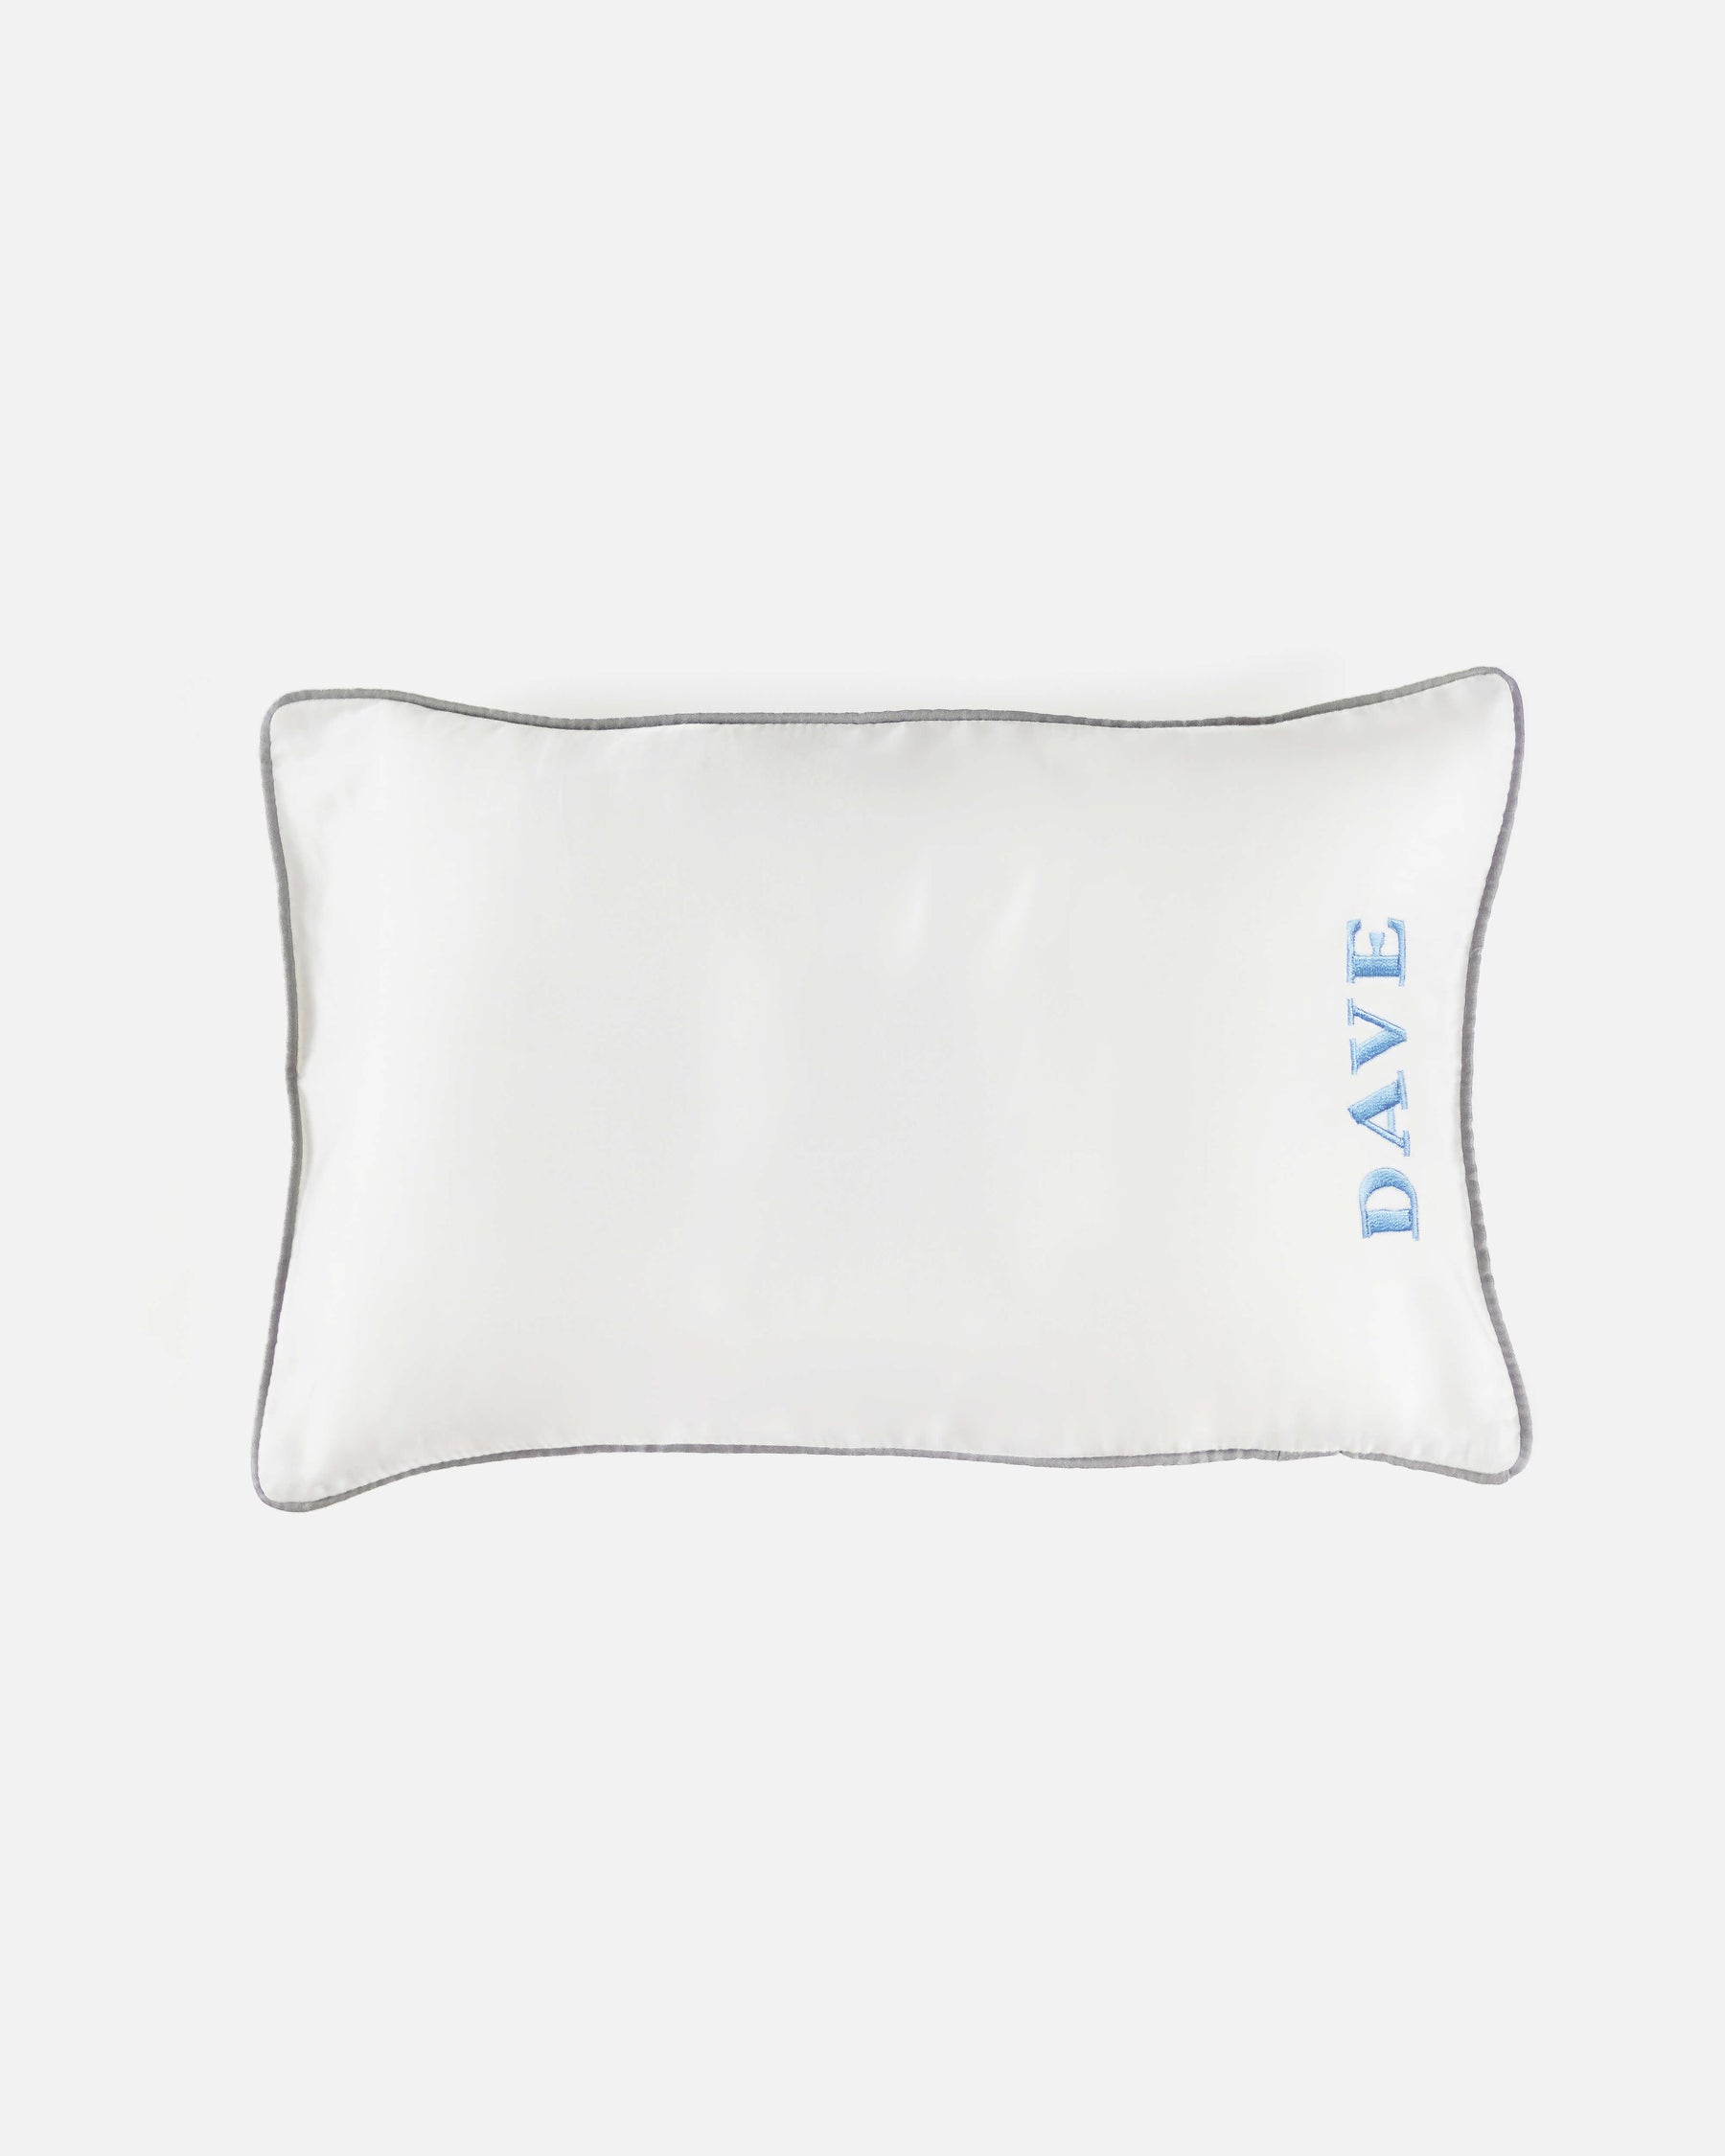 ava and ava ph organic bamboo lyocell baby pillowcase set - pillowcase, 2 bolstercases in white (white with gray piping) with embroidered name monogram